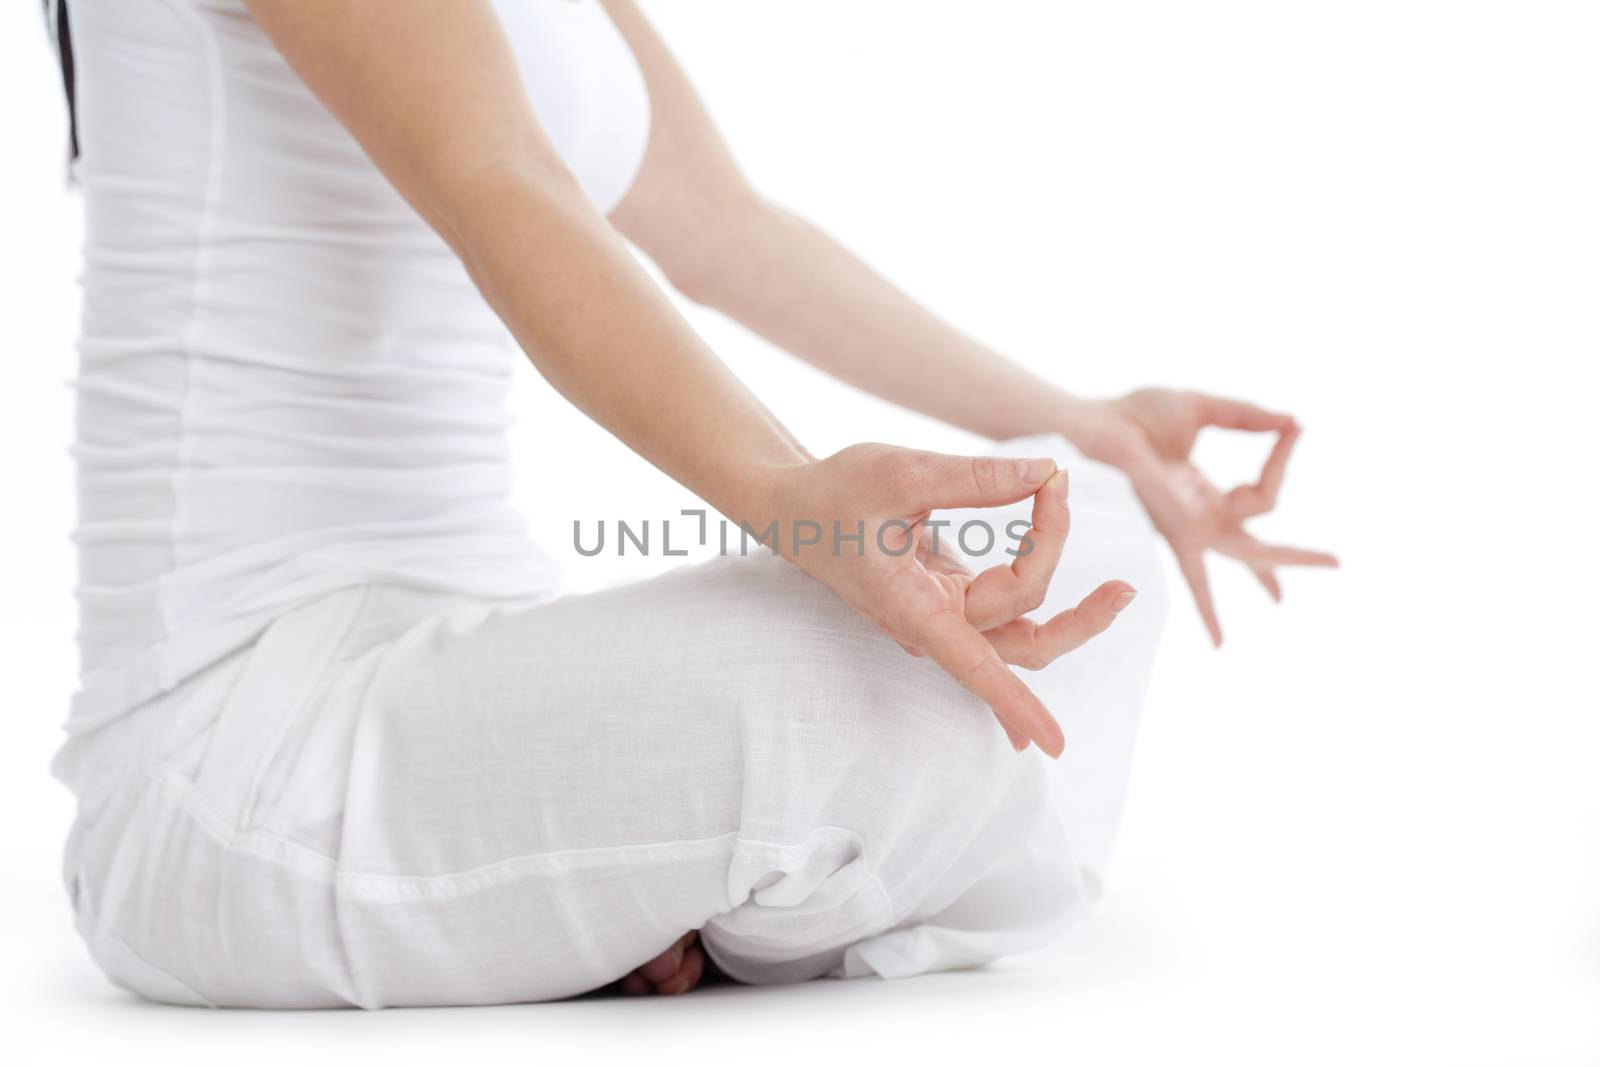 woman sitting on the floor exercising yoga - isolated on white